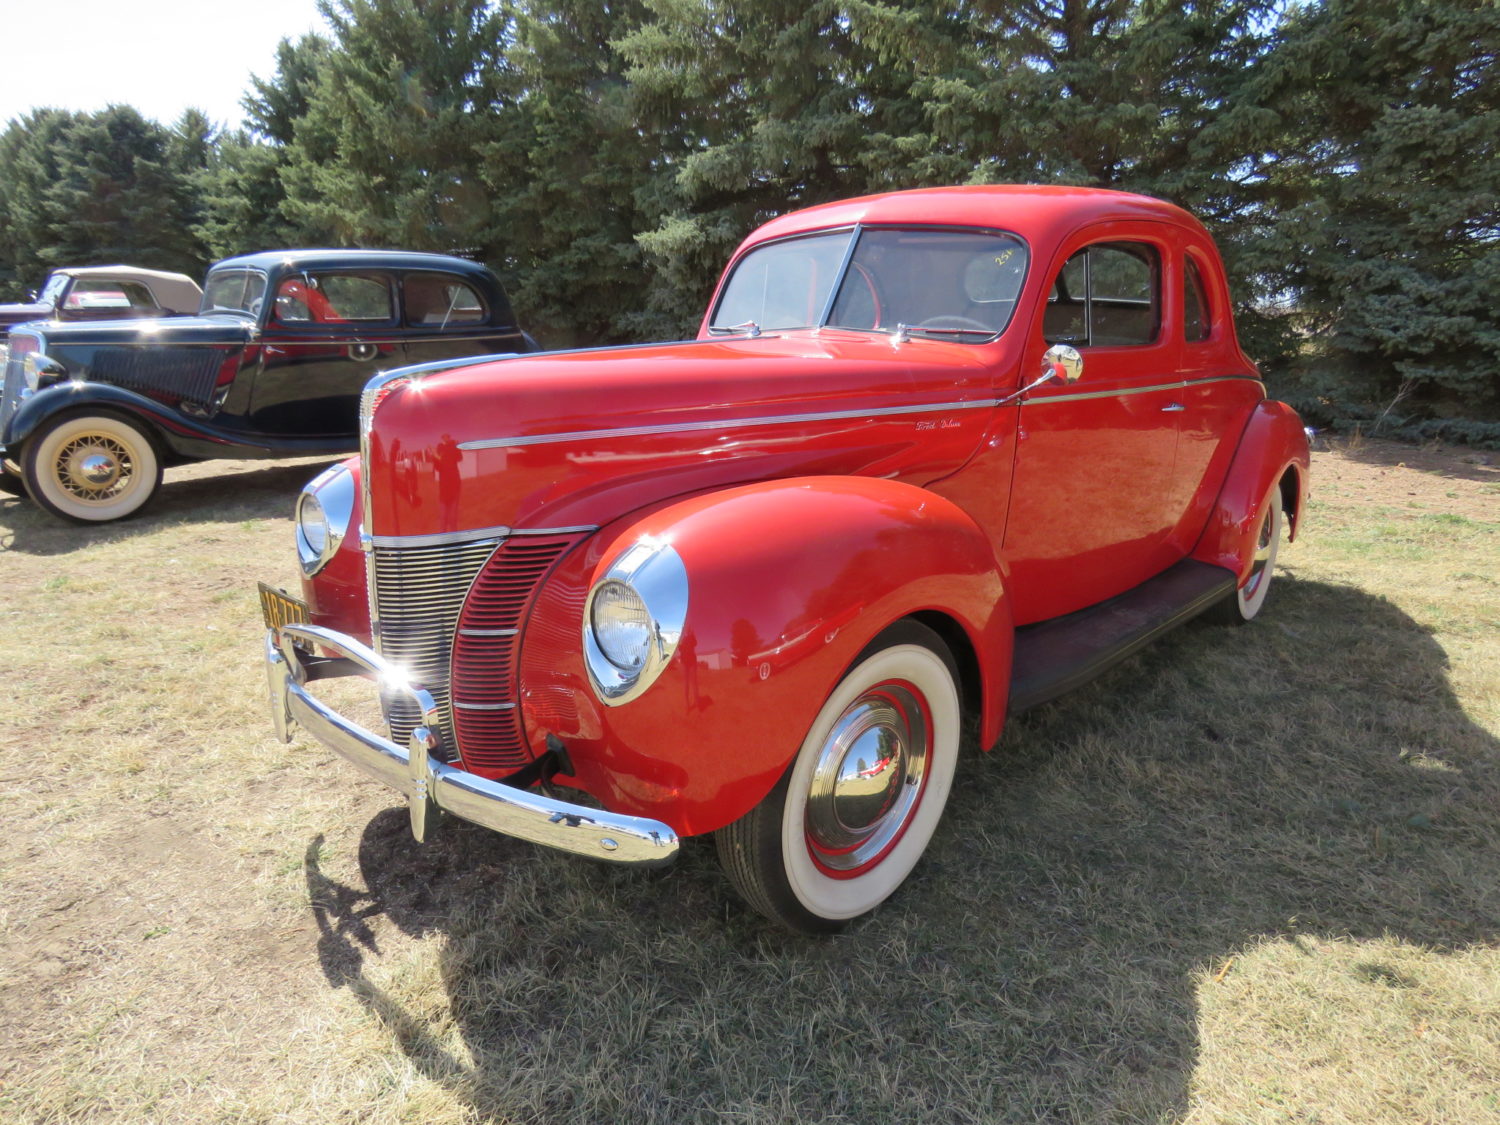 Fabulous Collector Cars, Antique Tractors, Memorabilia & More! The Krinke Collection - image 1